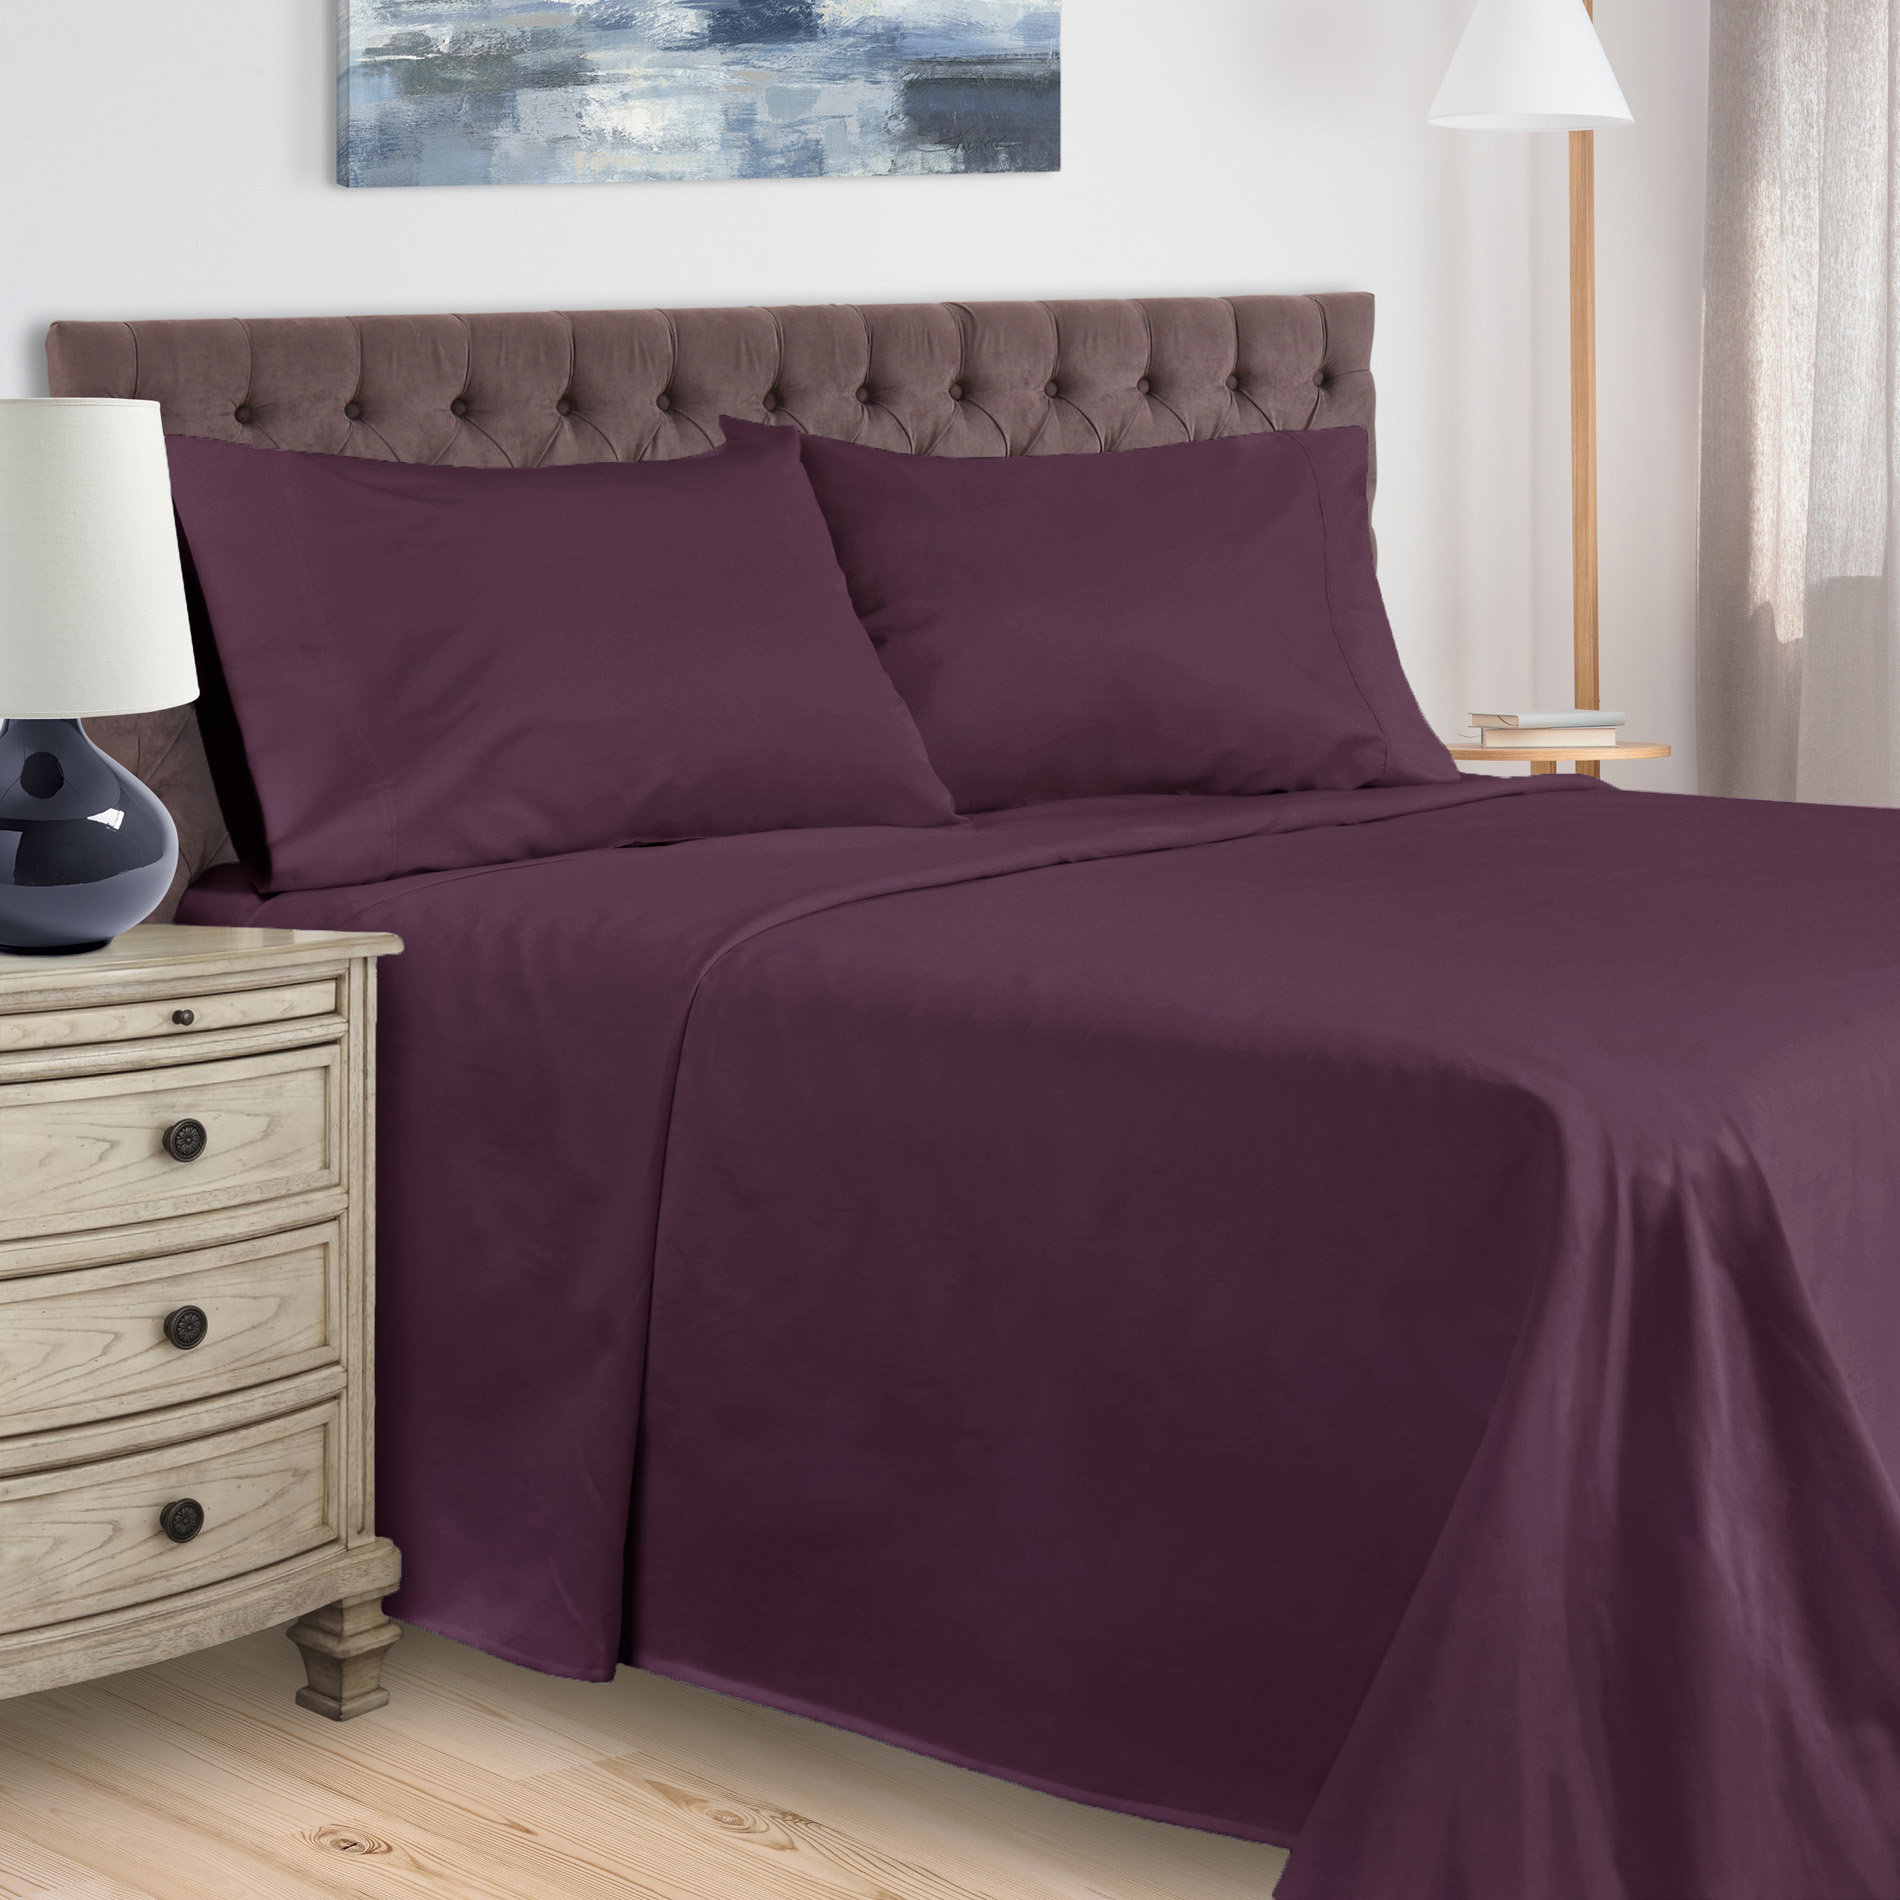 Soft Quality Bedding Collection 100%Cotton Select Size & Item Lavender Solid 